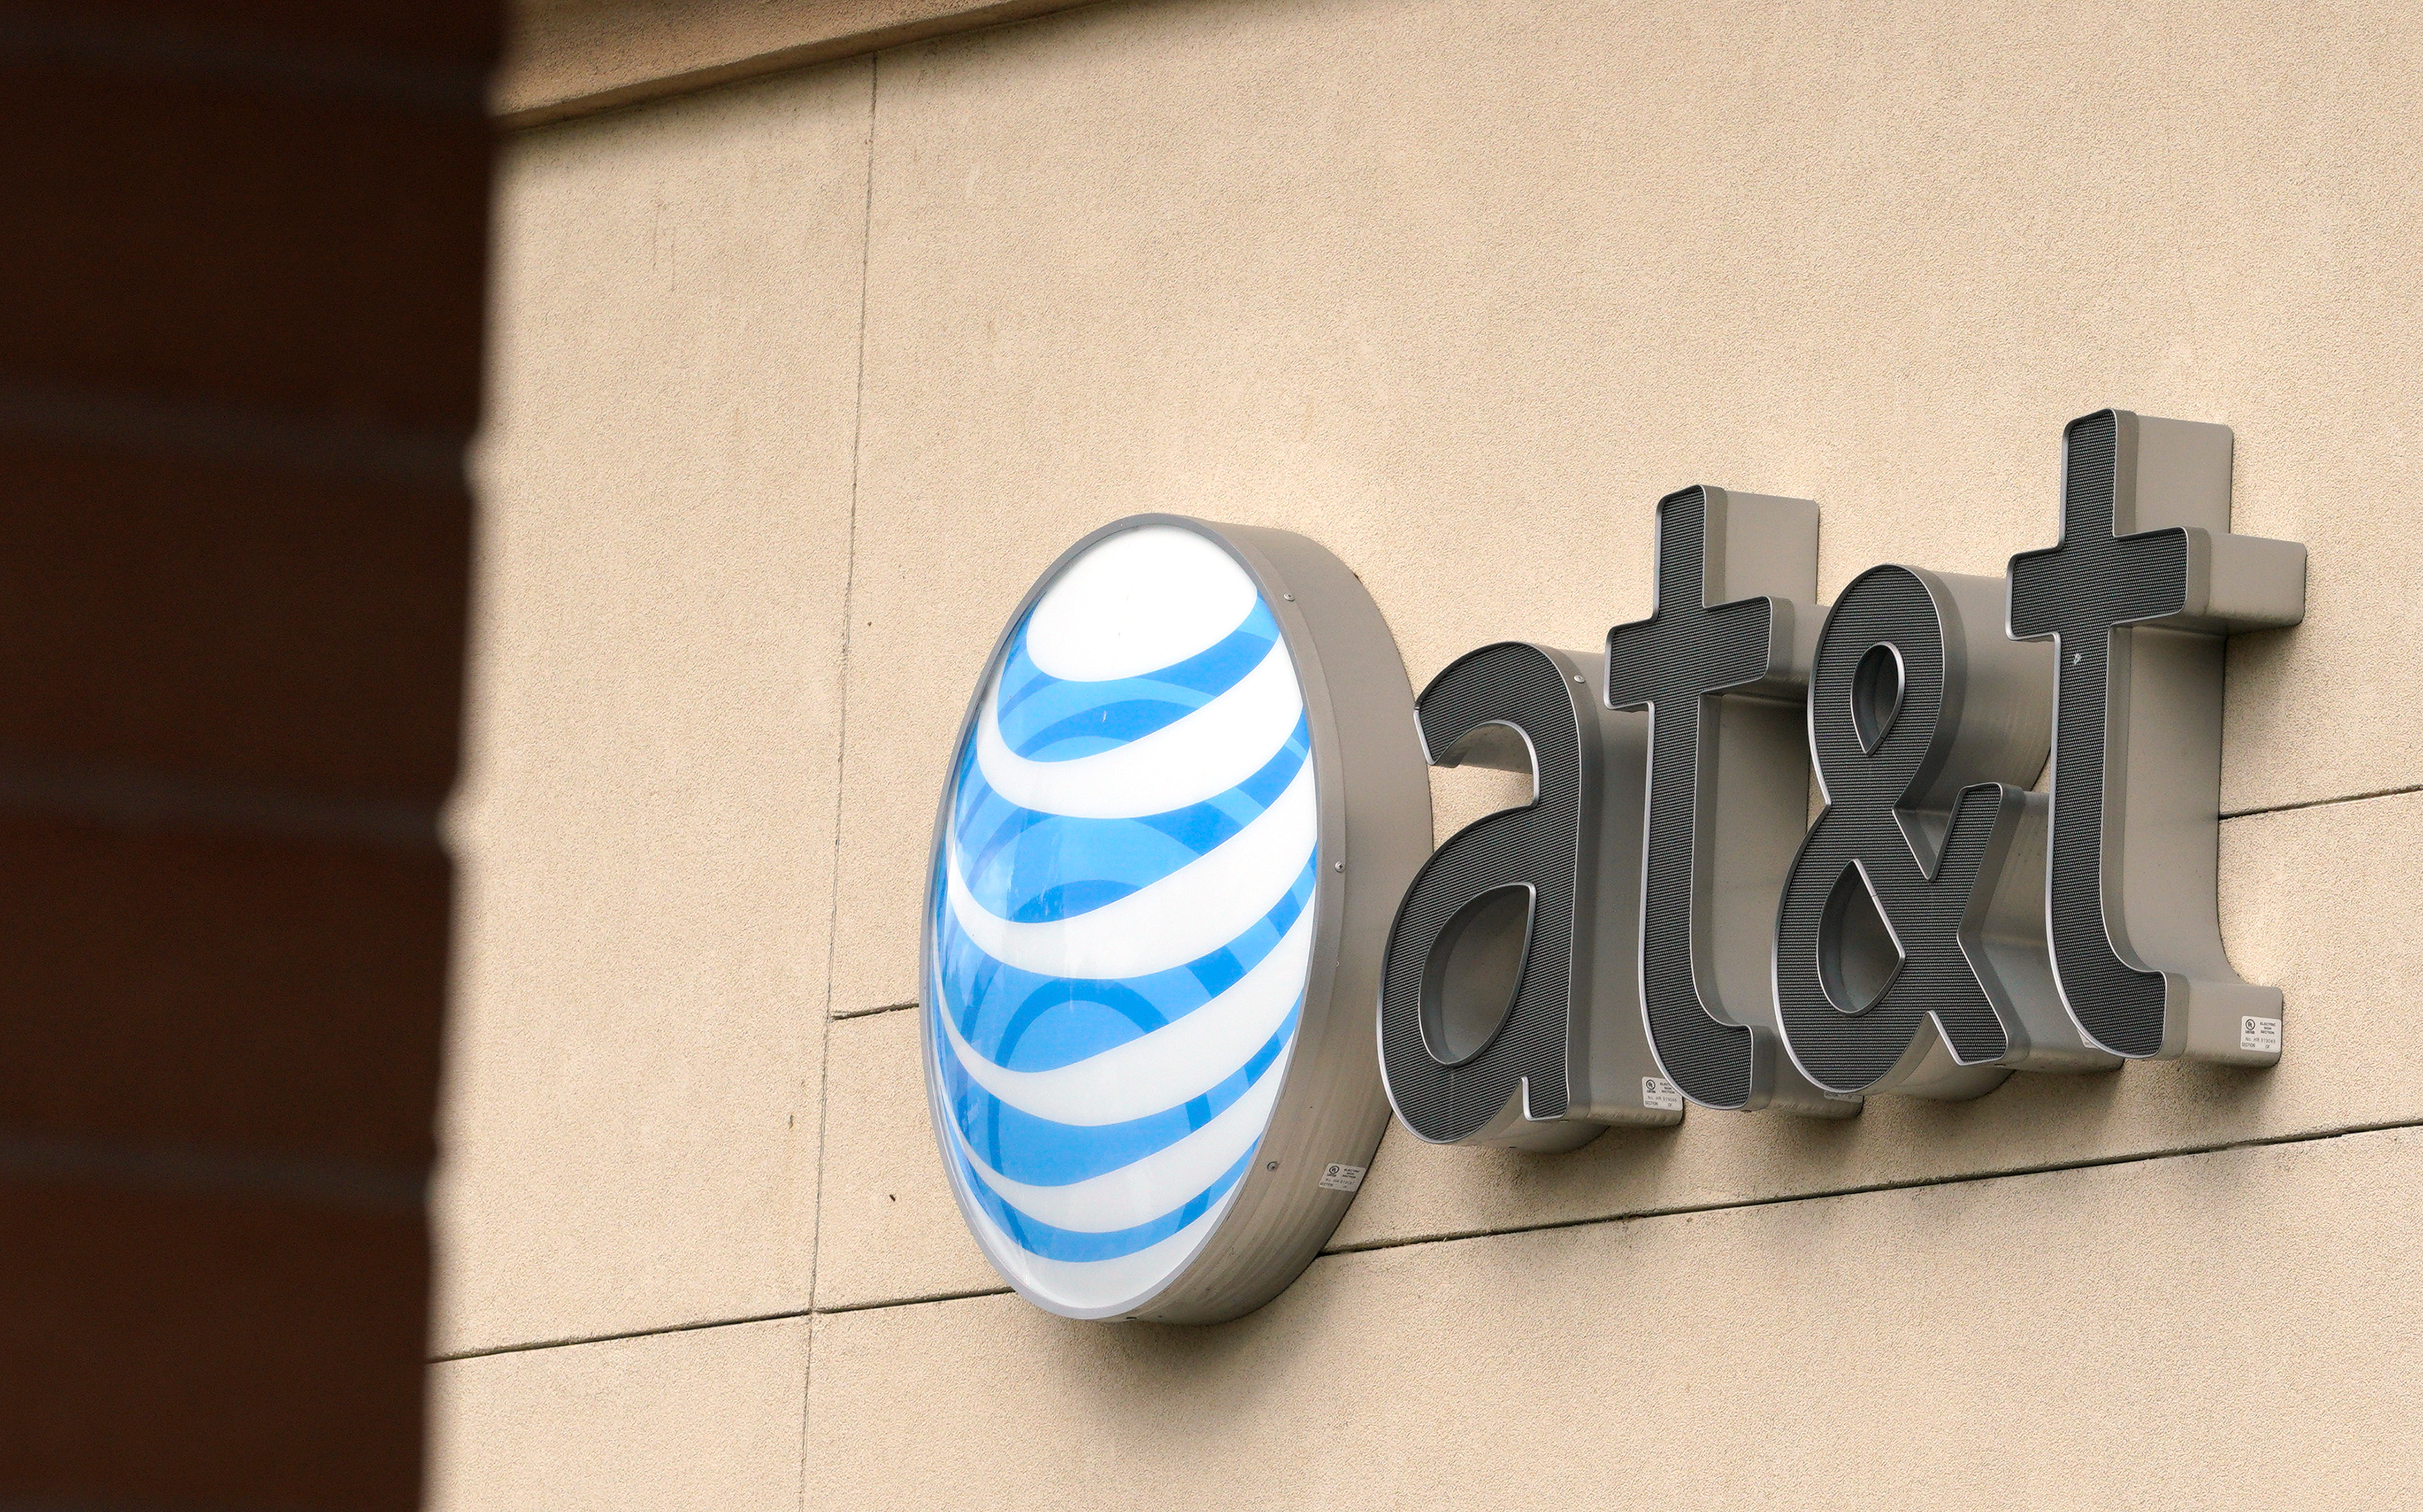 The AT&T logo in Golden, Colorado United States. REUTERS/Rick Wilking